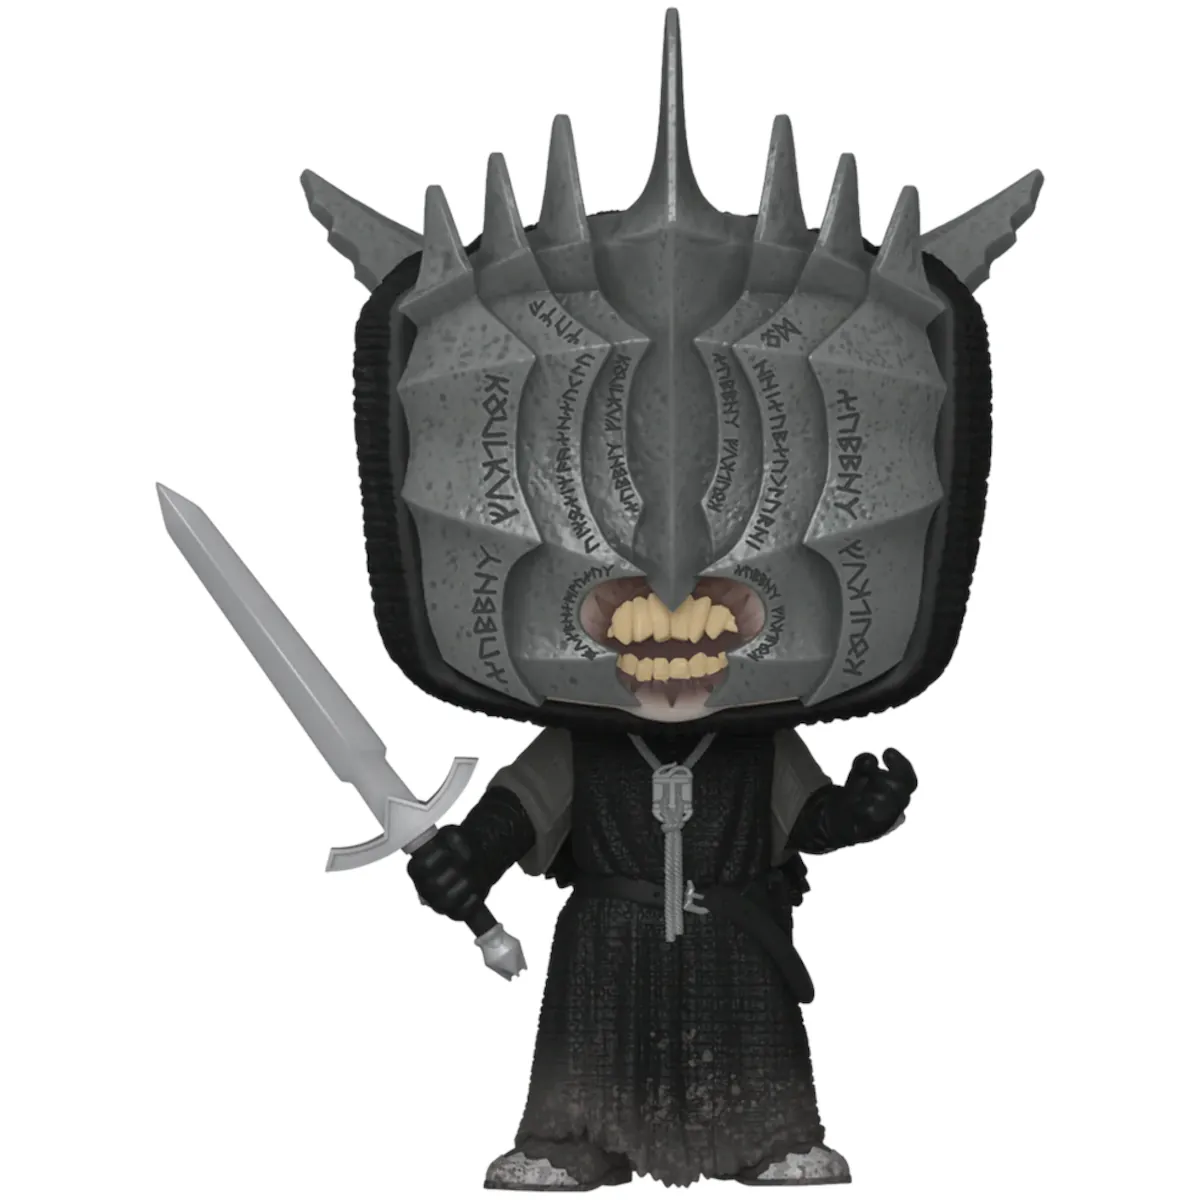 80832 Funko Pop! Movies - The Lord of the Rings - Mouth of Sauron Collectable Vinyl Figure